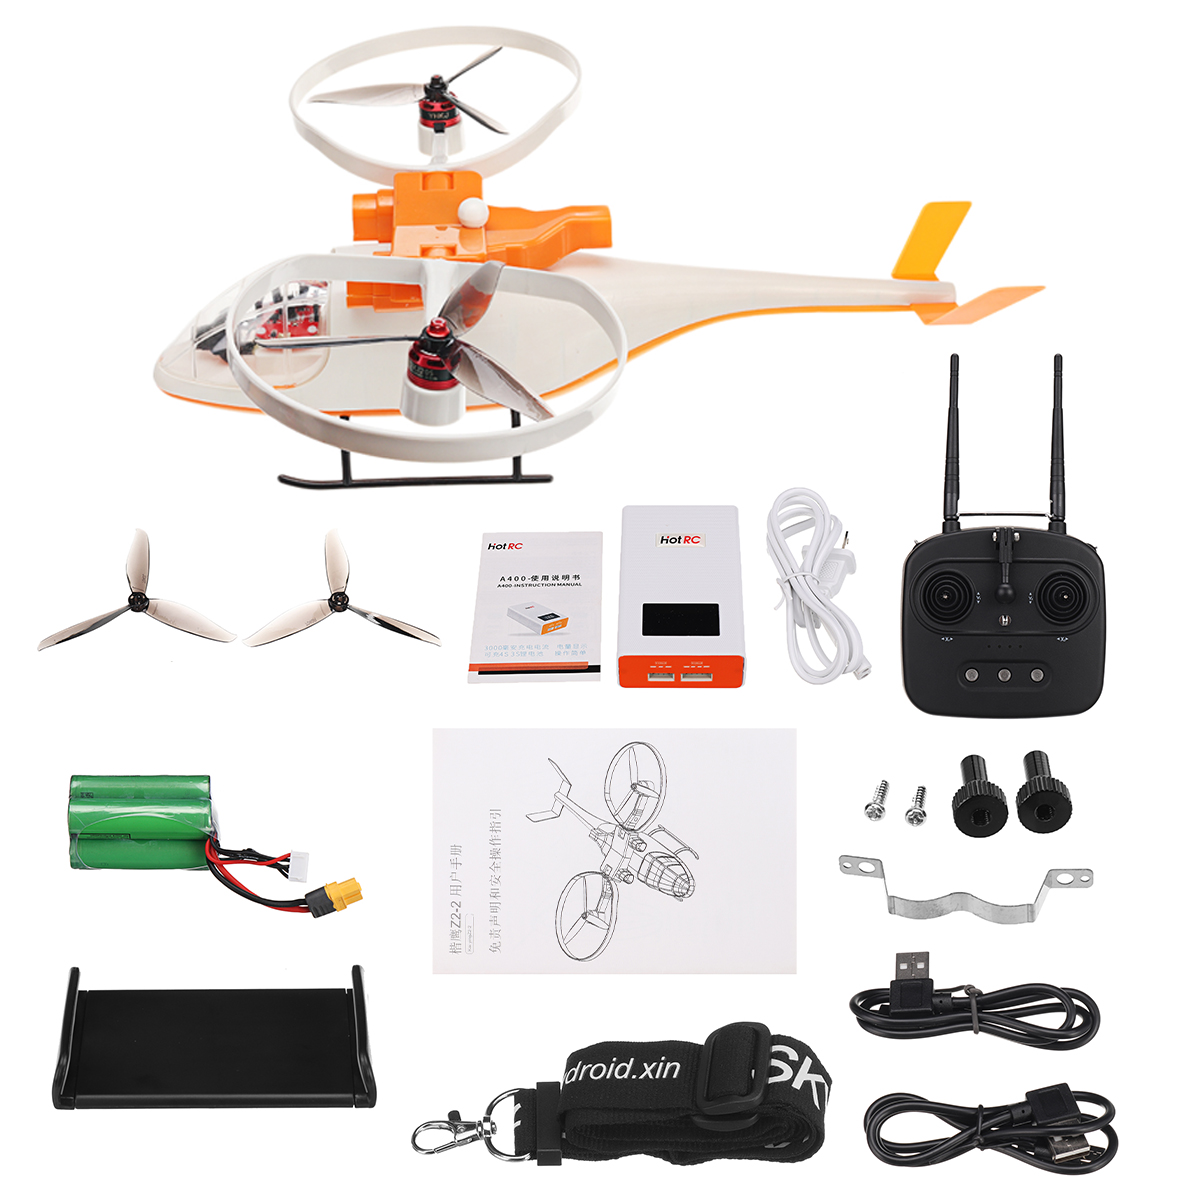 KY-Z2-6CH-Two-axis-Brushless-Helicopter-720P-FPV-RTF-Version-Support-Fixed-point-Fixed-altitude-Flig-1880504-2